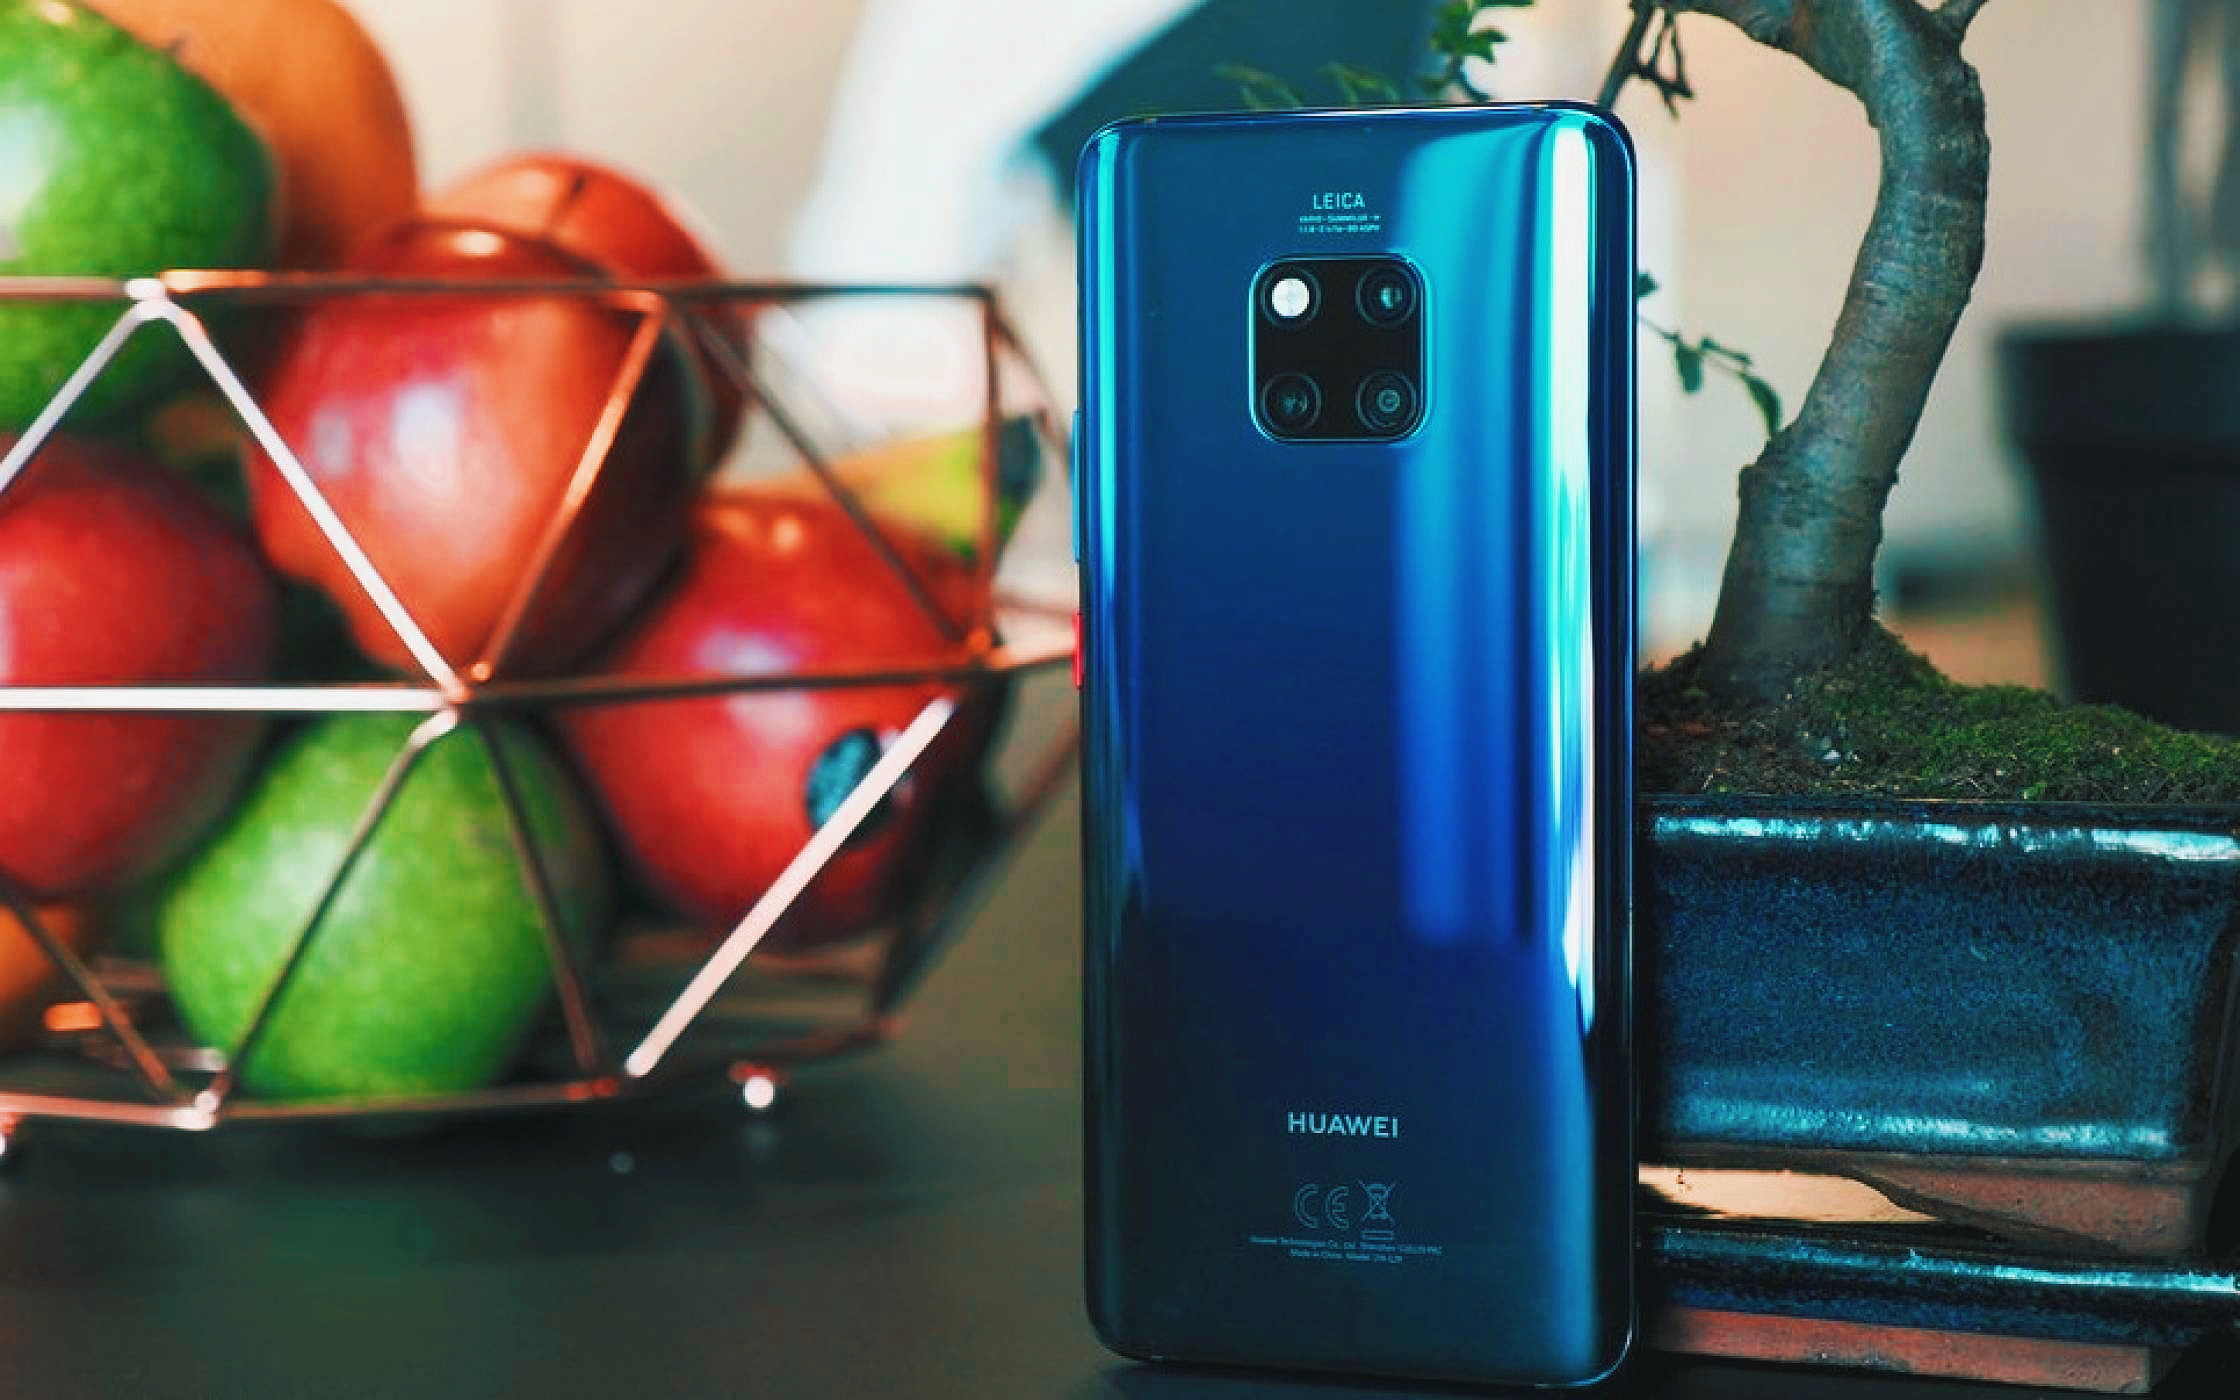 Advantages and disadvantages of the smartphone Huawei Mate 30 Lite